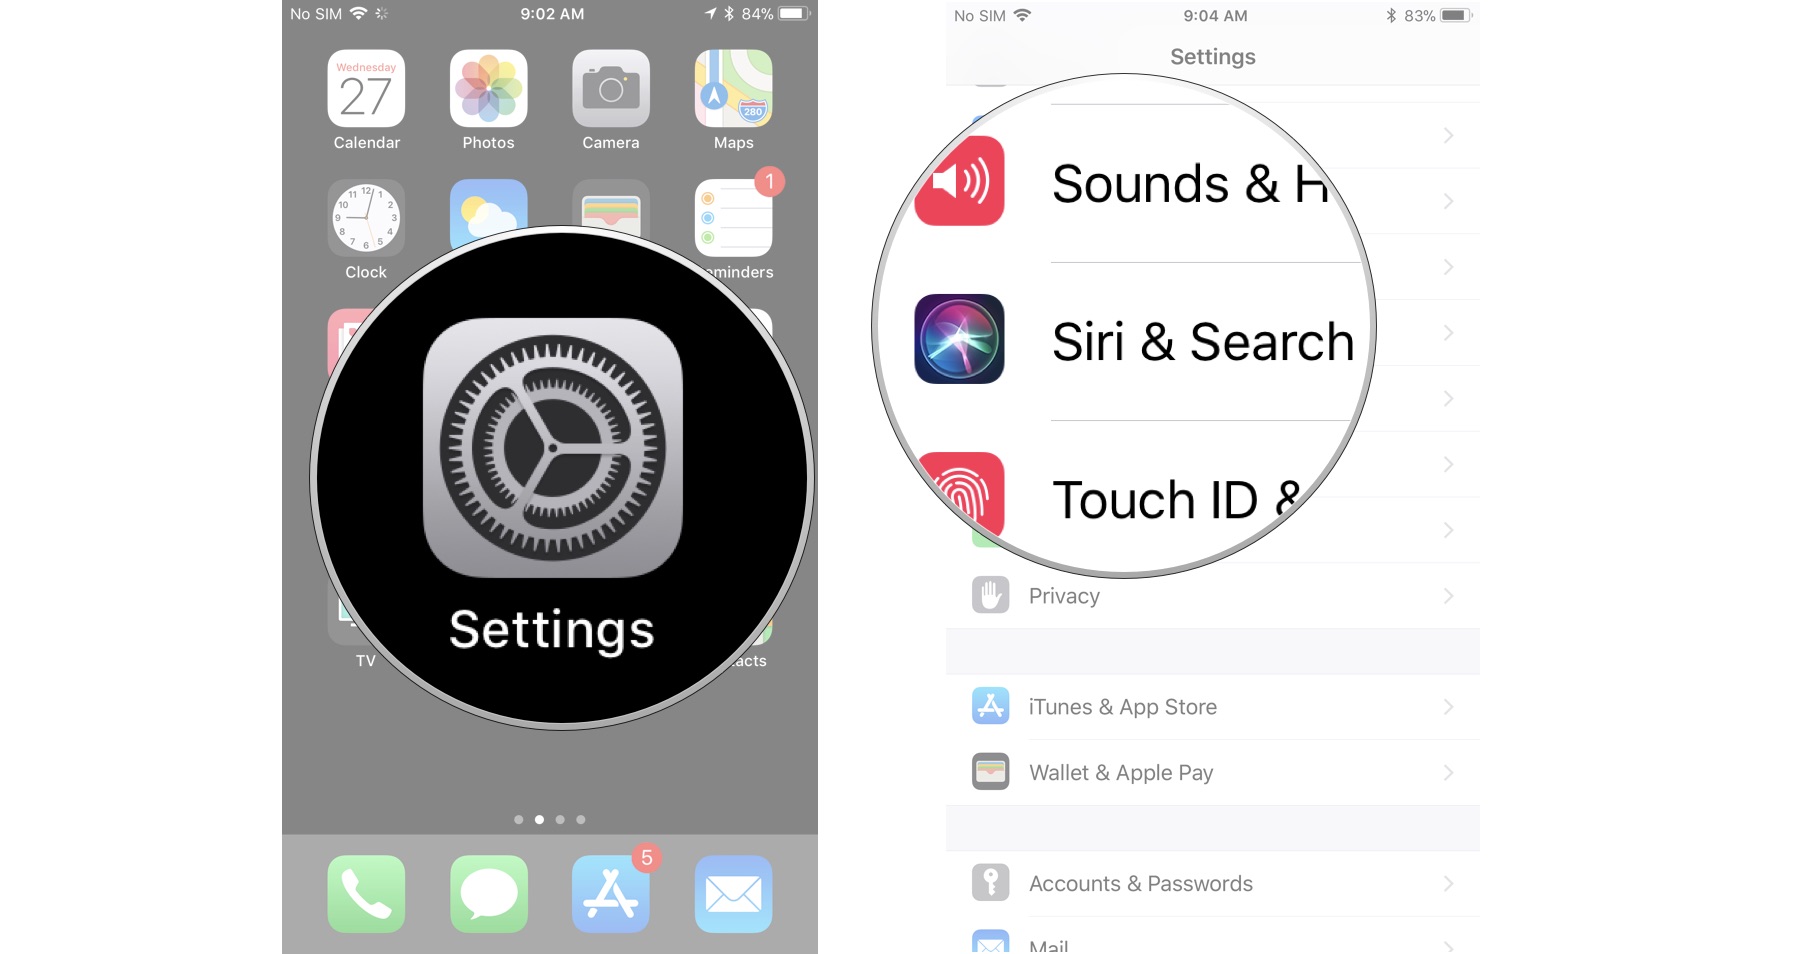 Tap settings, then tap Siri and Search